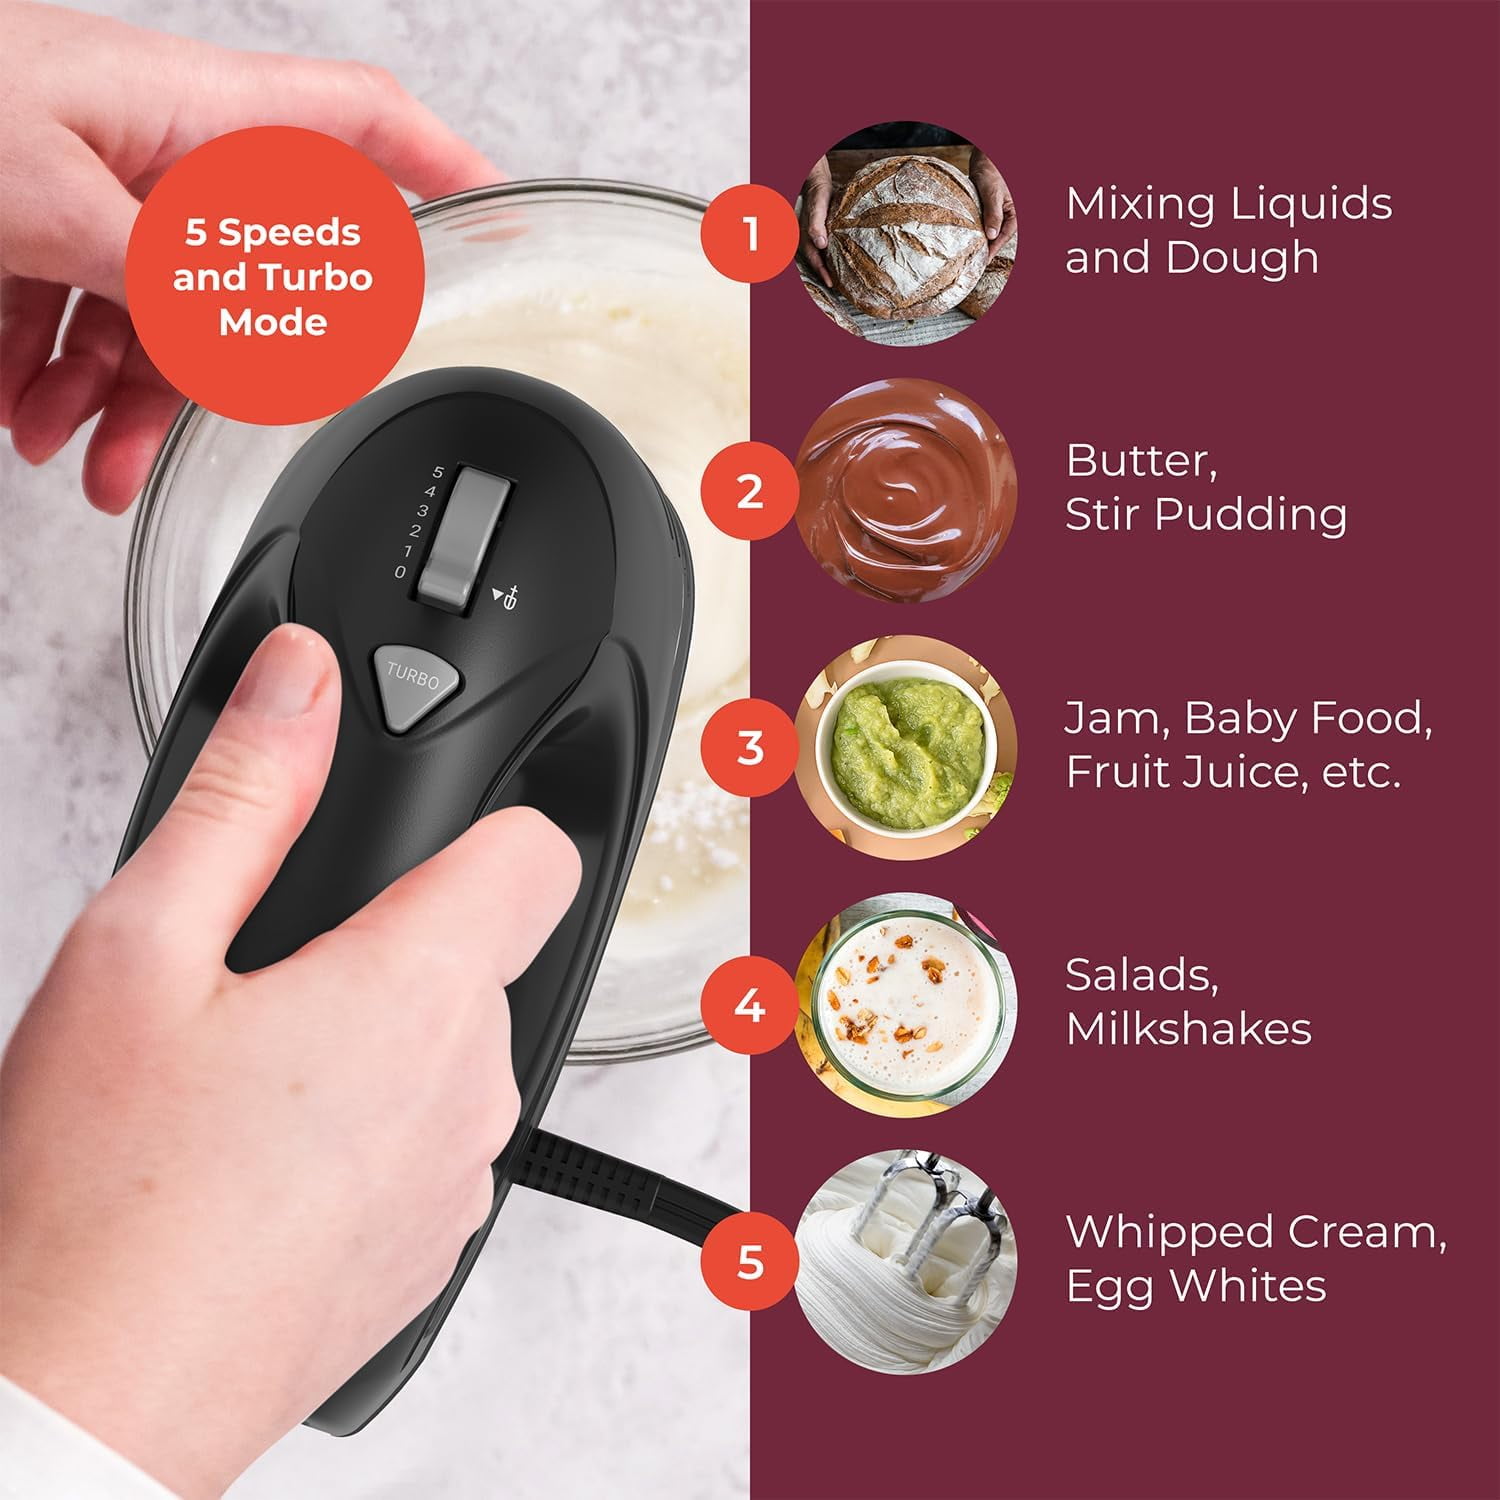  Mueller Electric Hand Mixer, 5 Speed with Snap-On Case